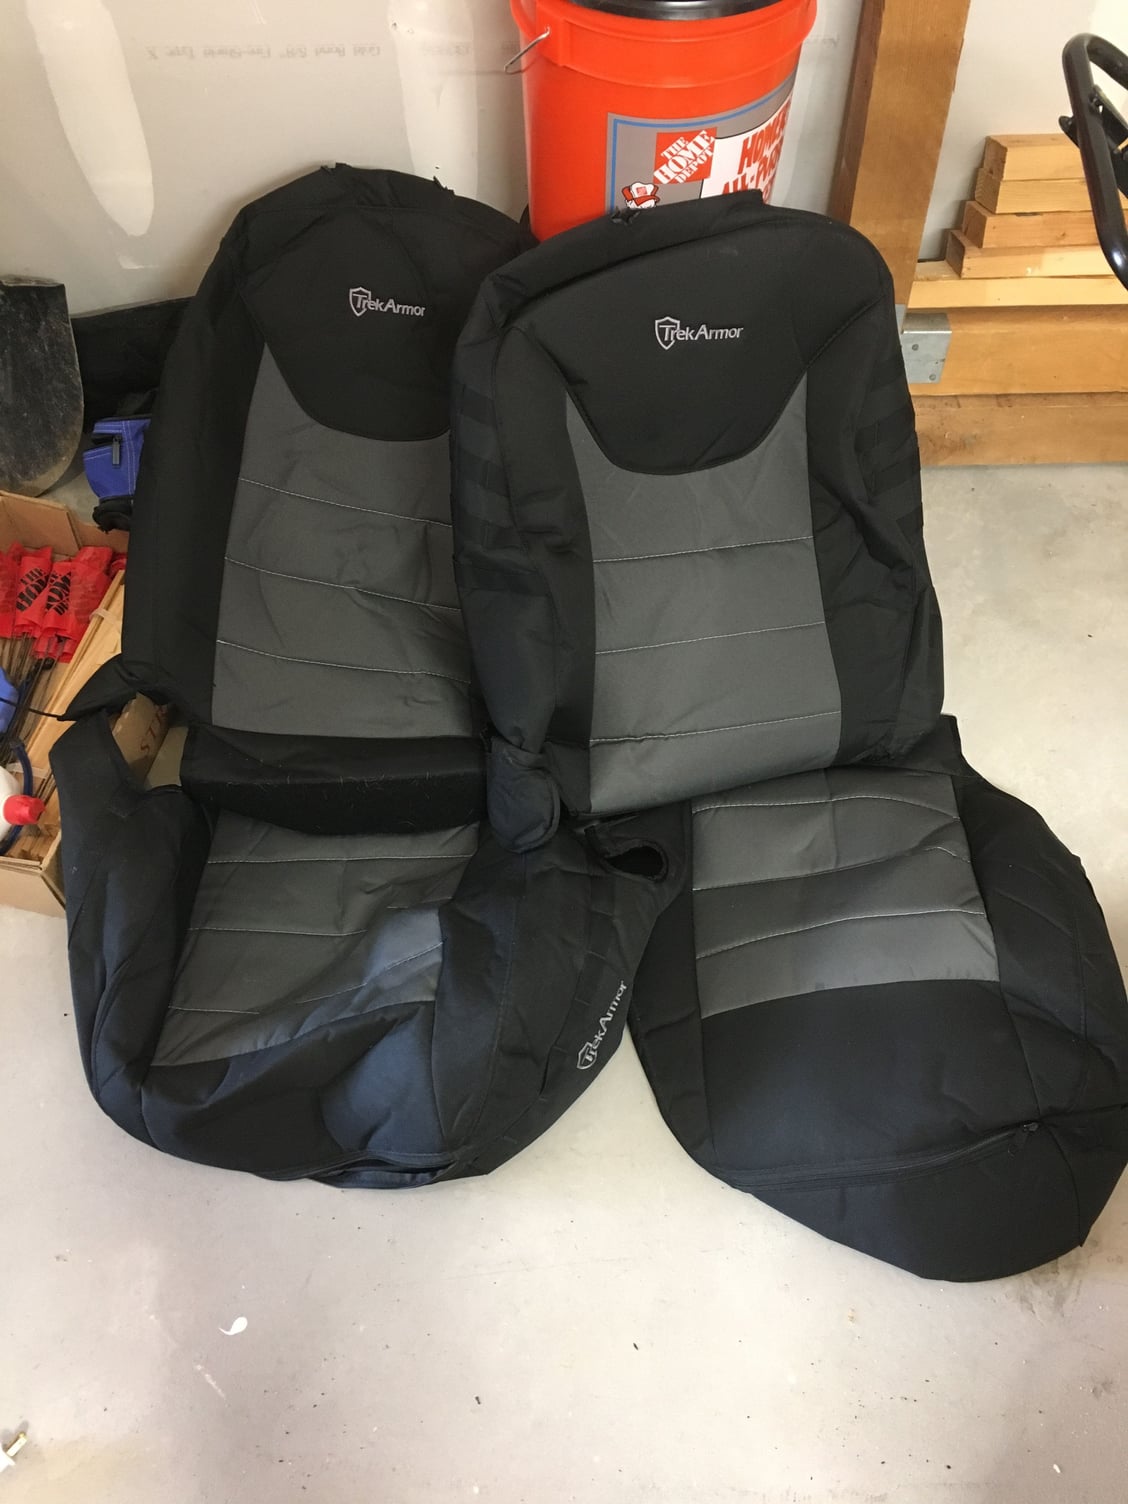 Interior/Upholstery - TrekArmor Seat Covers - Used - 2015 Jeep Wrangler - Castle Rock, CO 80108, United States